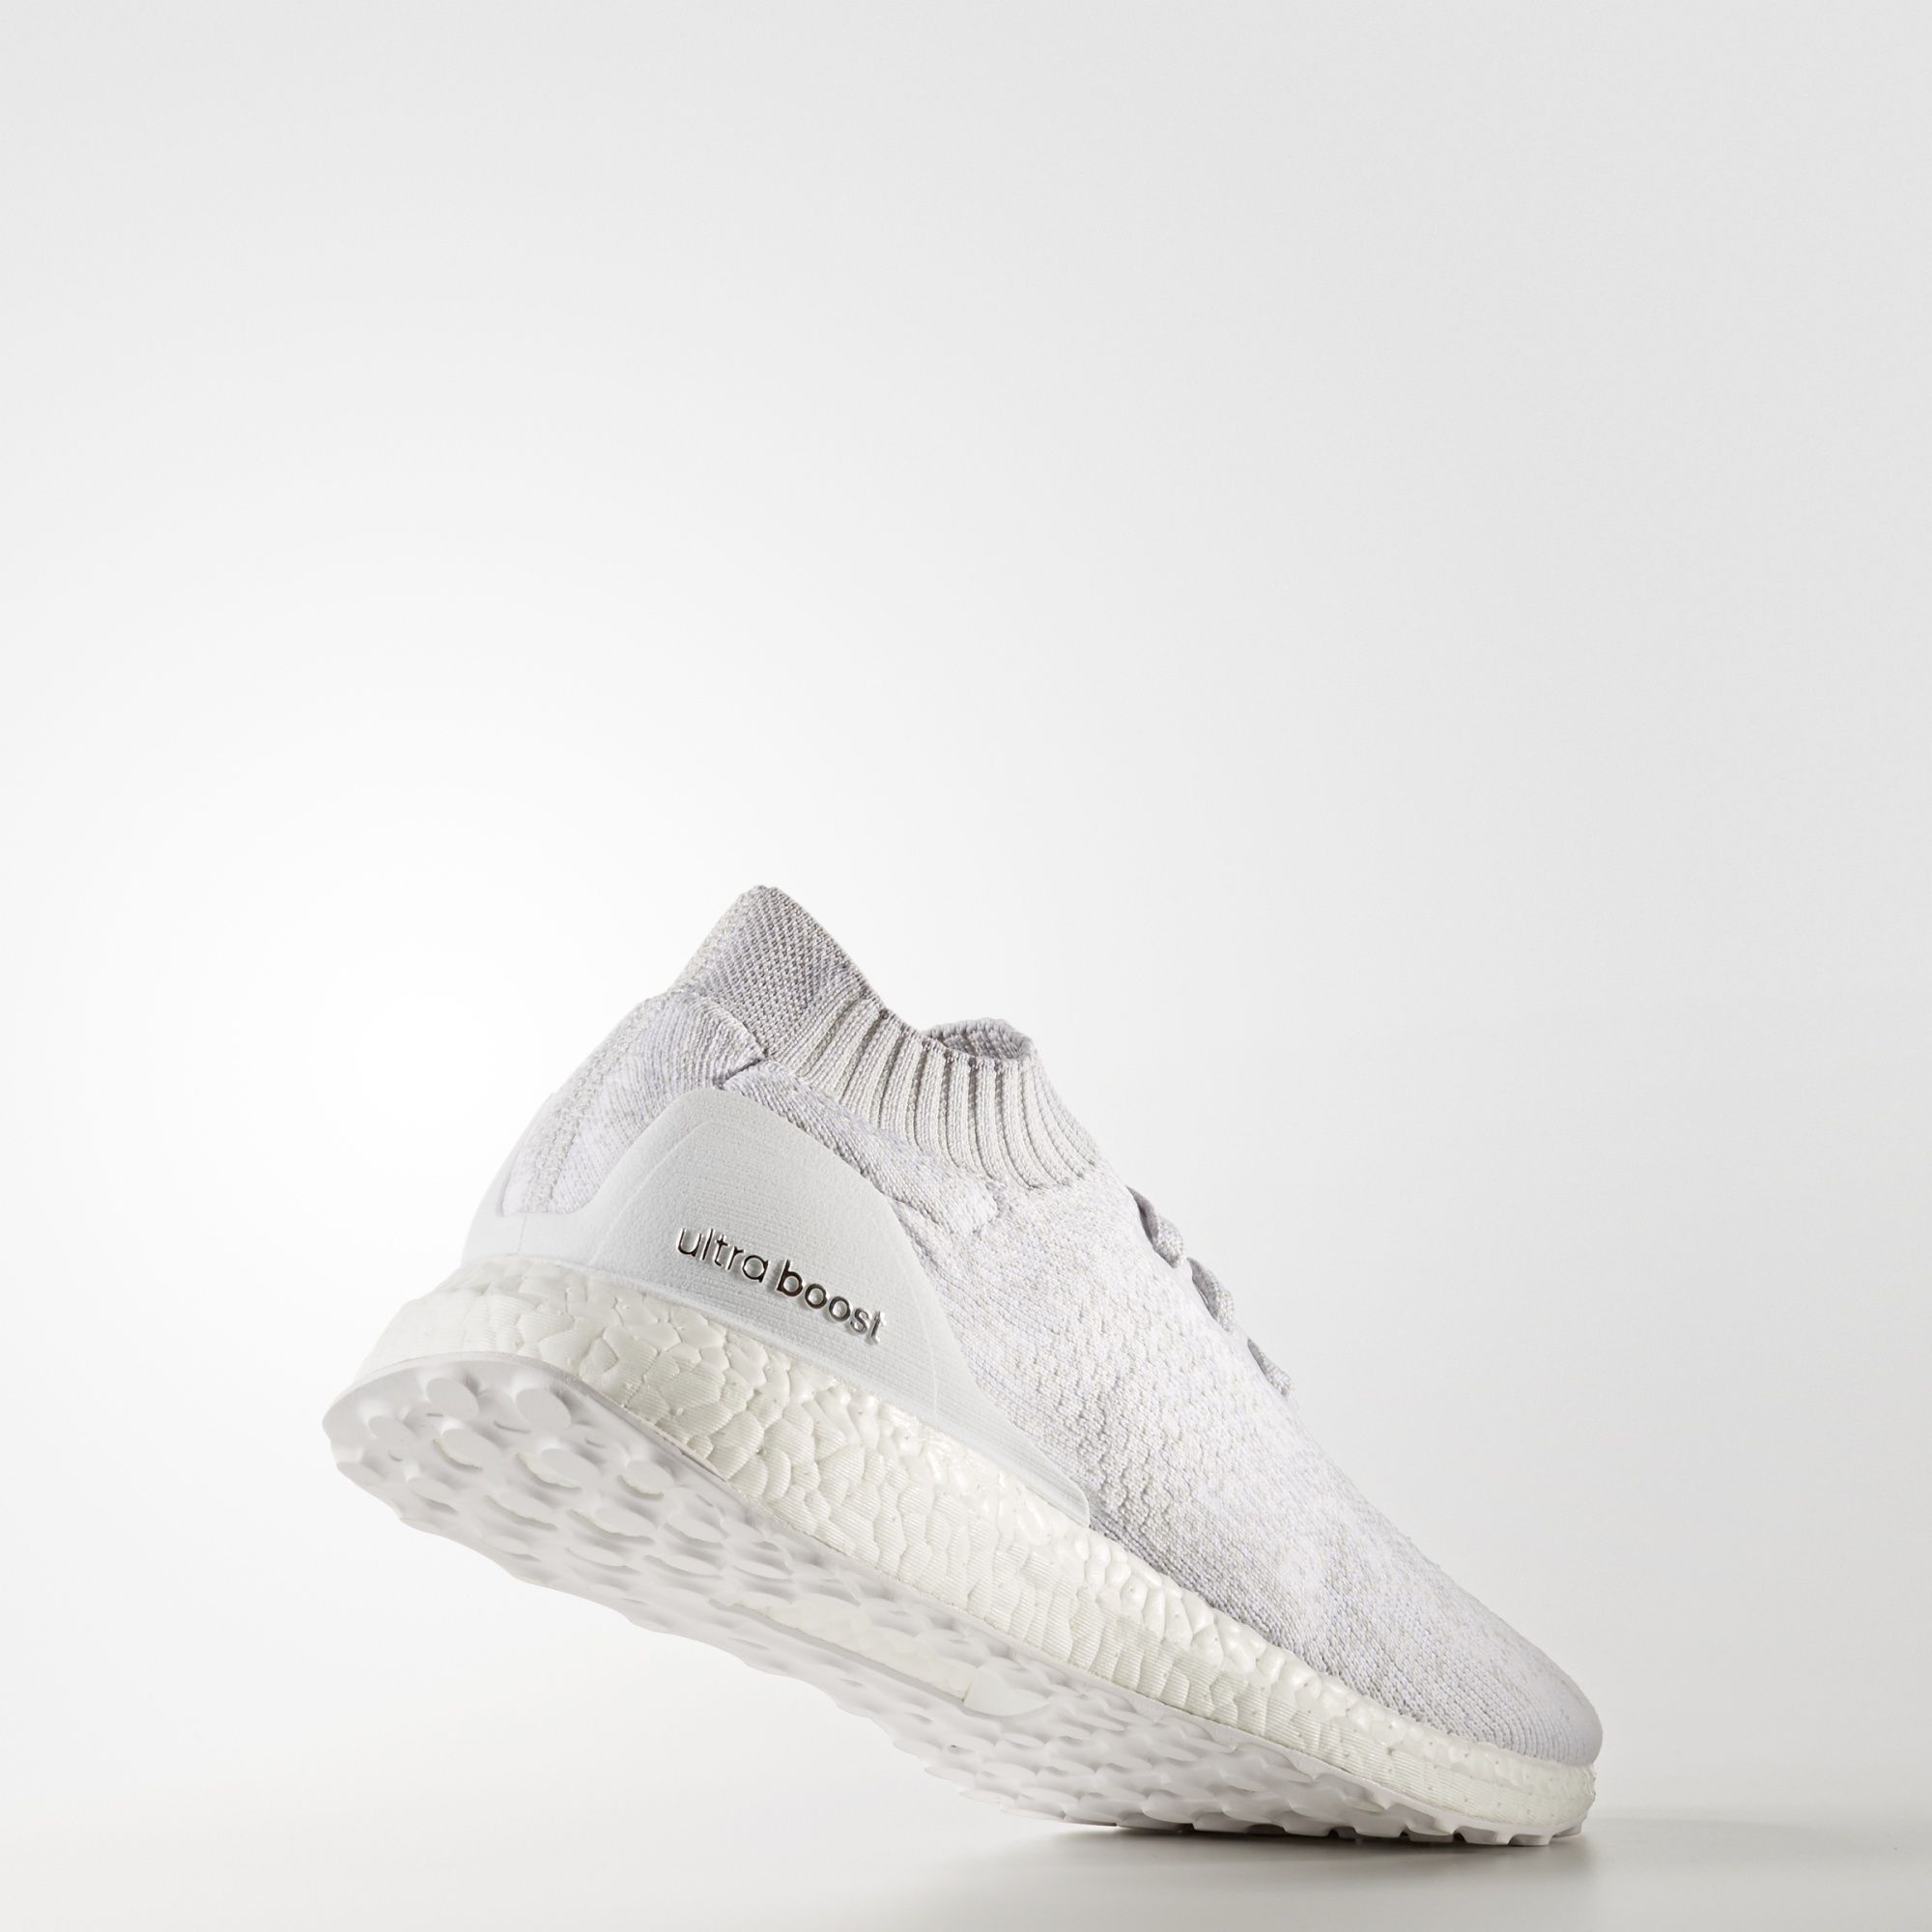 Adidas Ultra BOOST Uncaged
« Triple White »